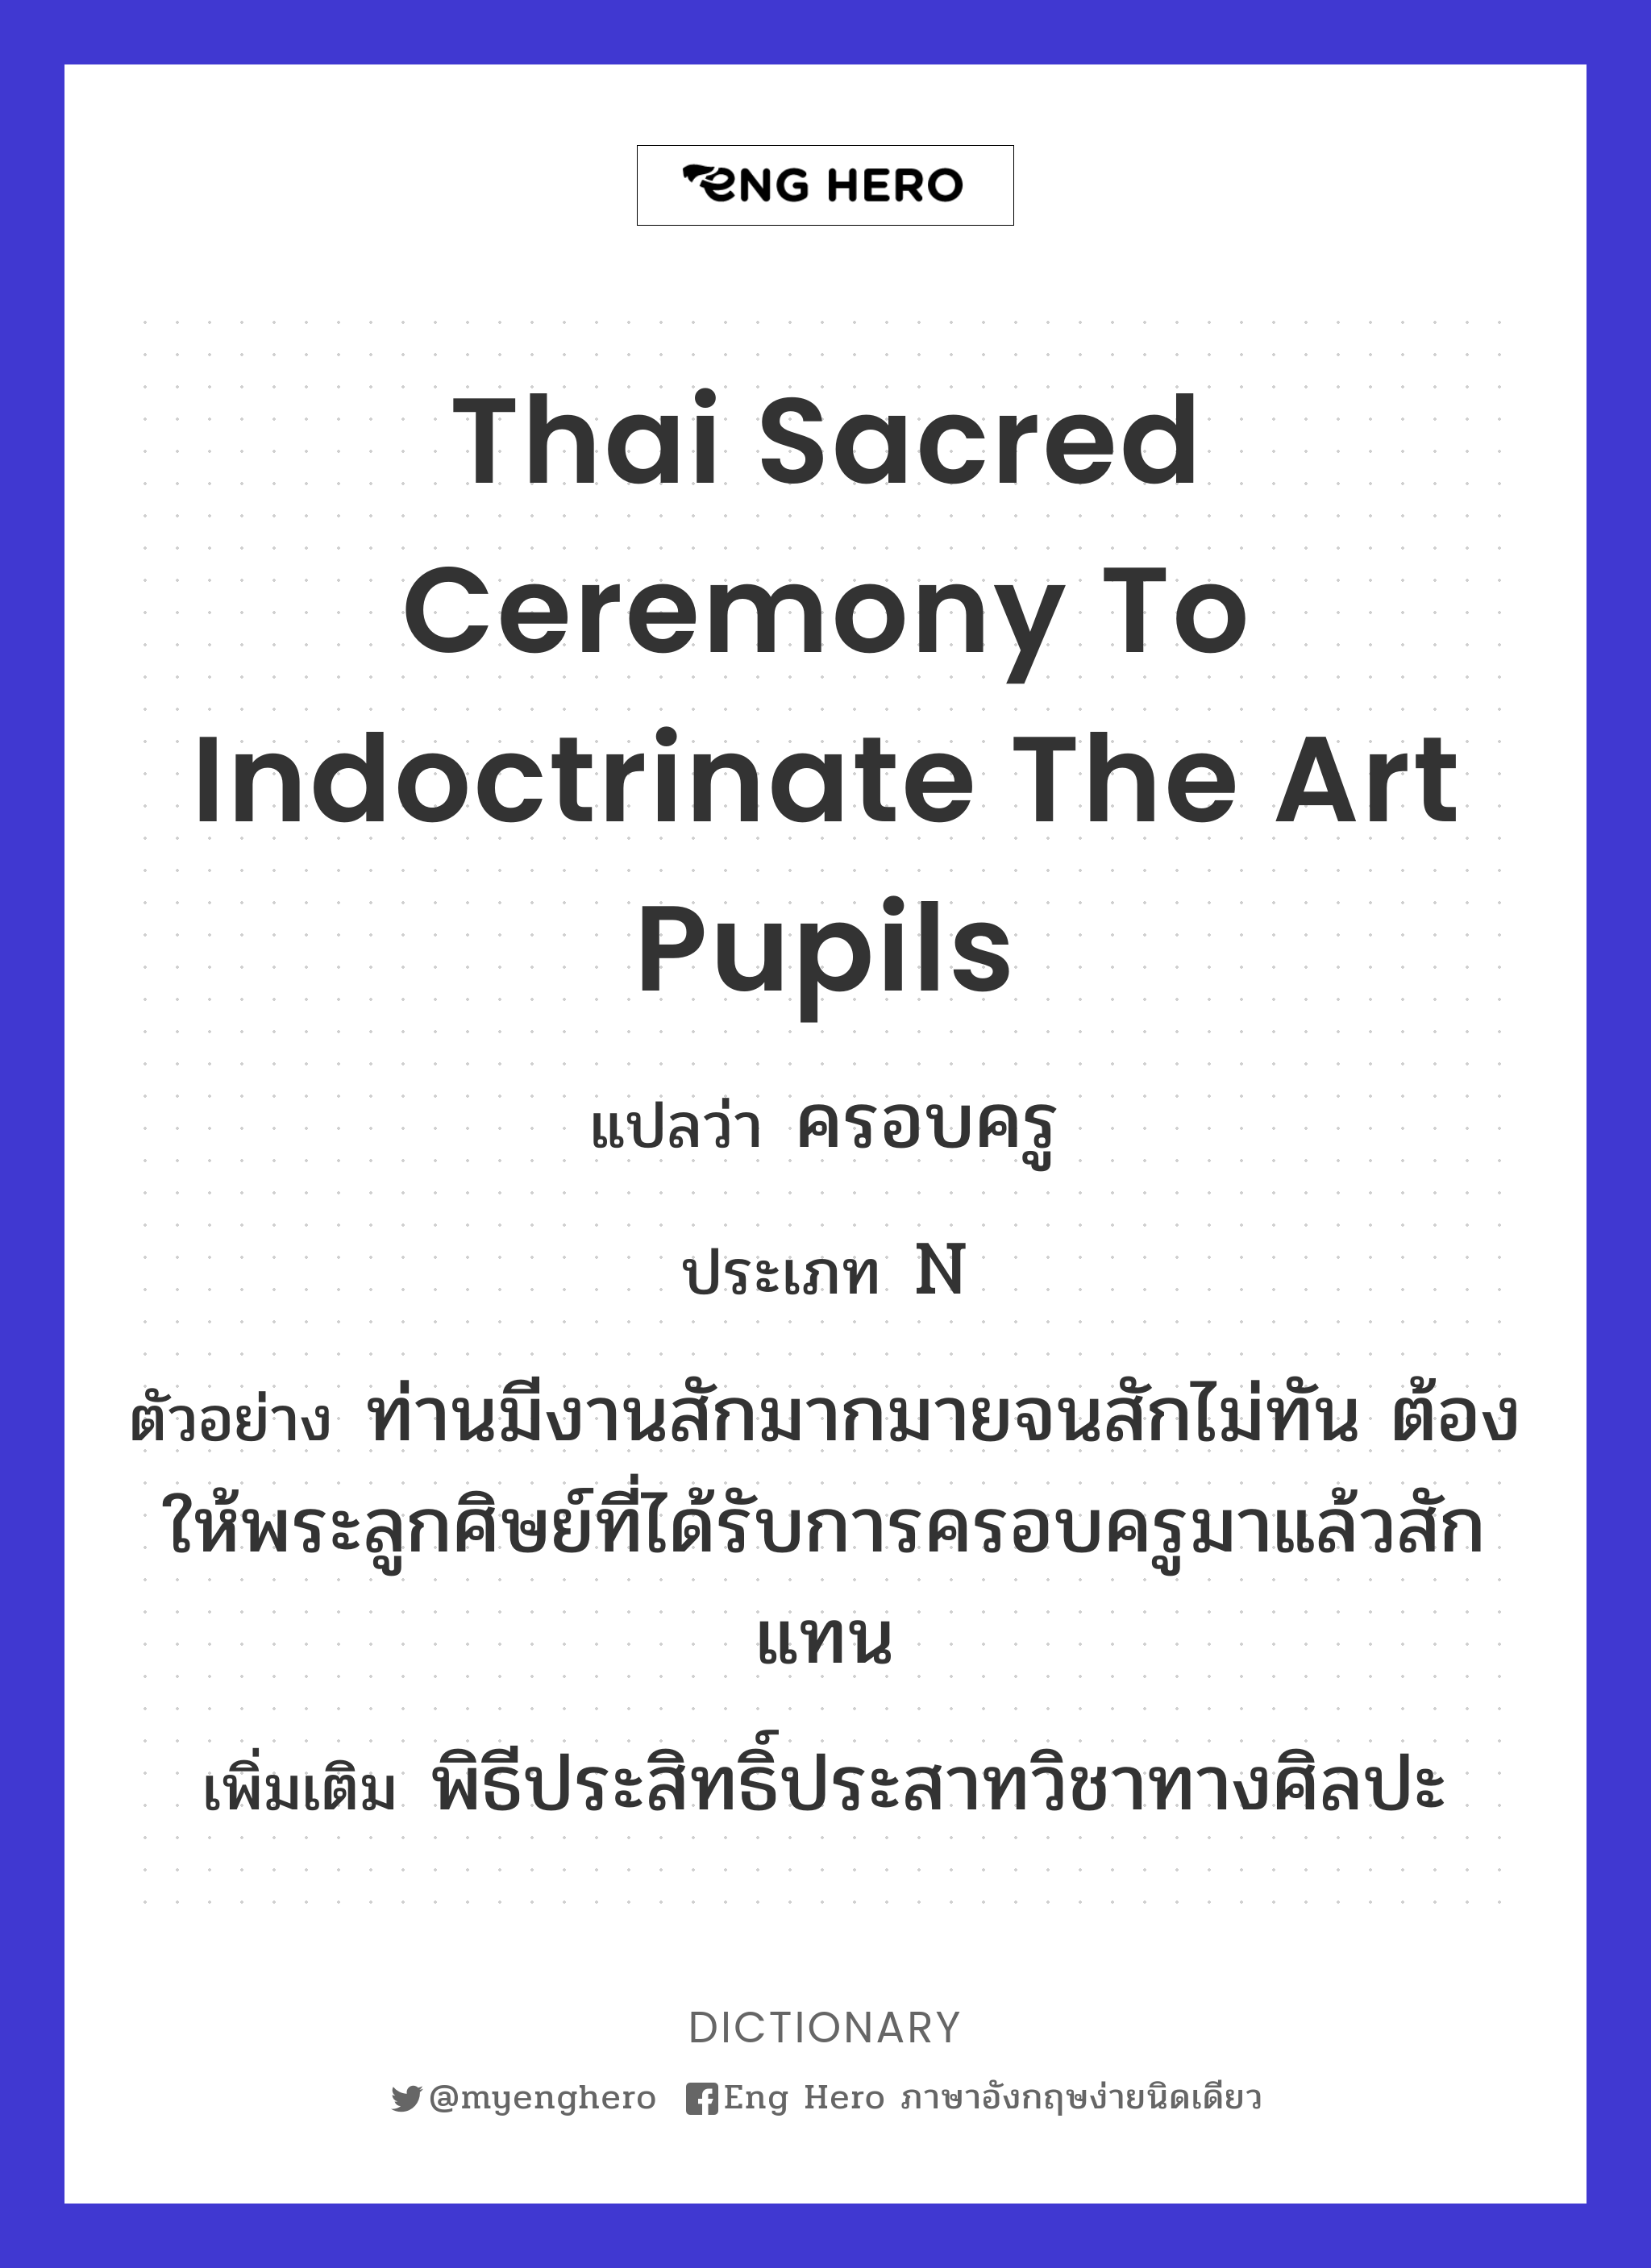 Thai sacred ceremony to indoctrinate the art pupils